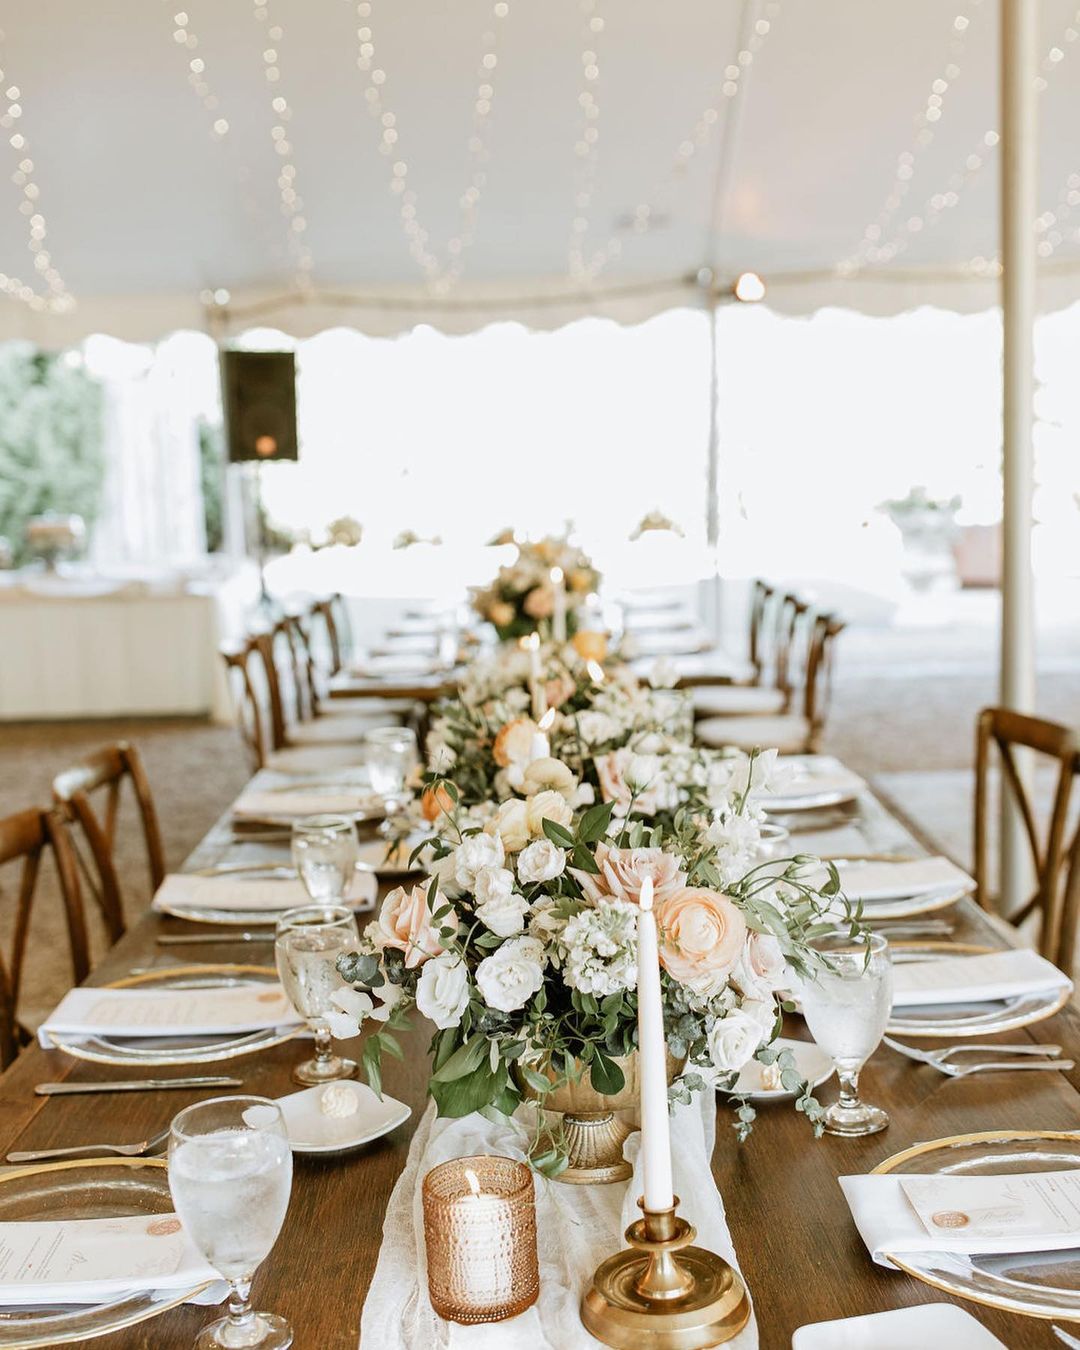 wedding ideas with candles and flowers perfect decor